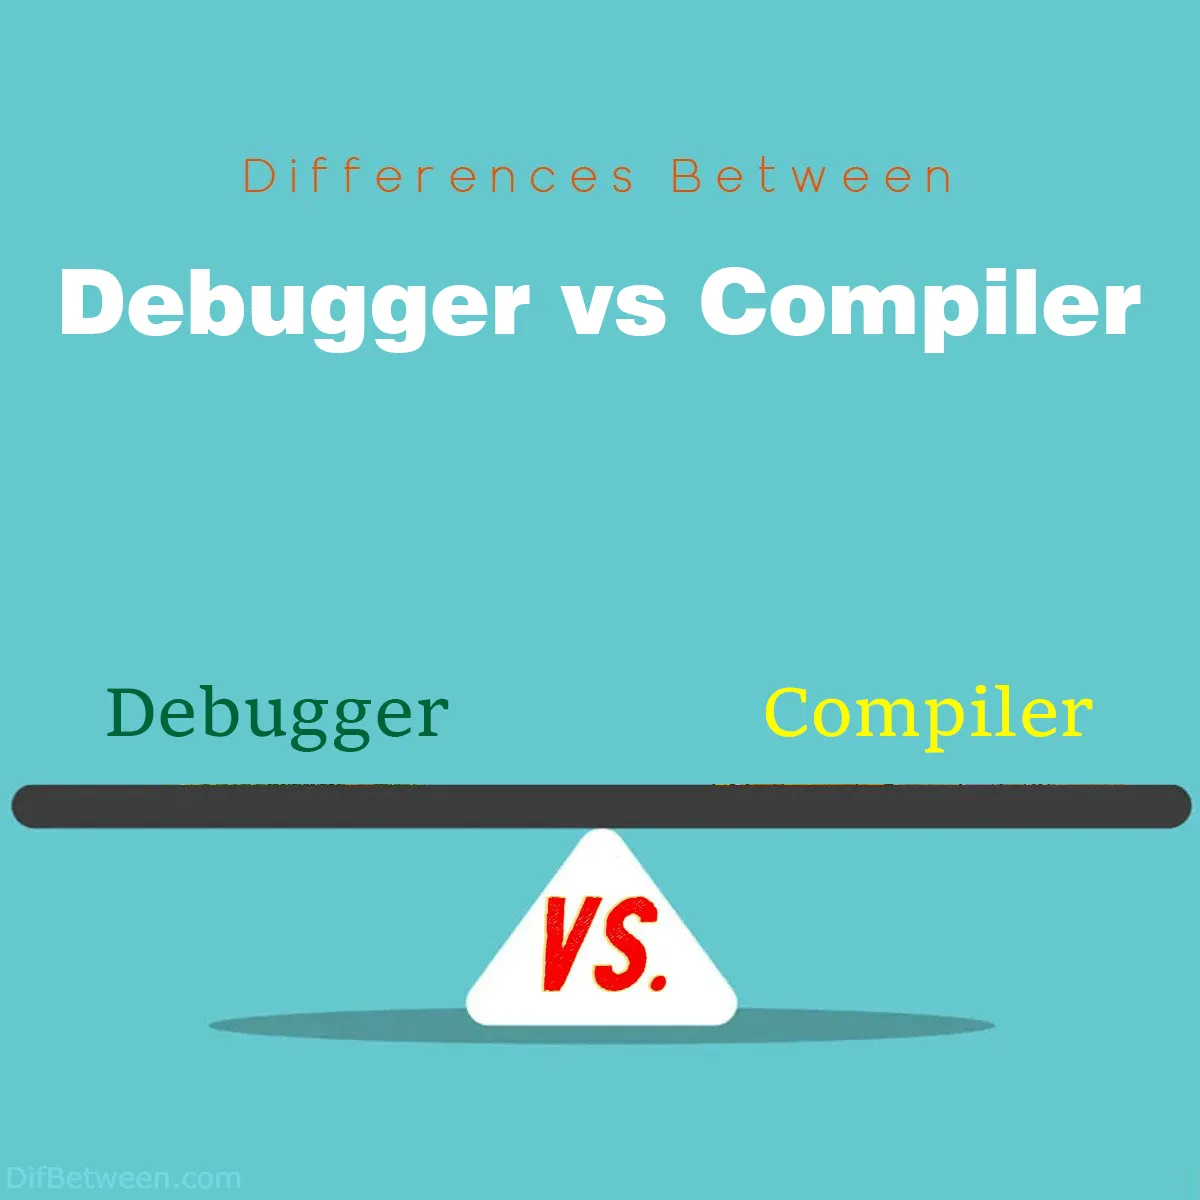 Differences Between Debugger and Compiler